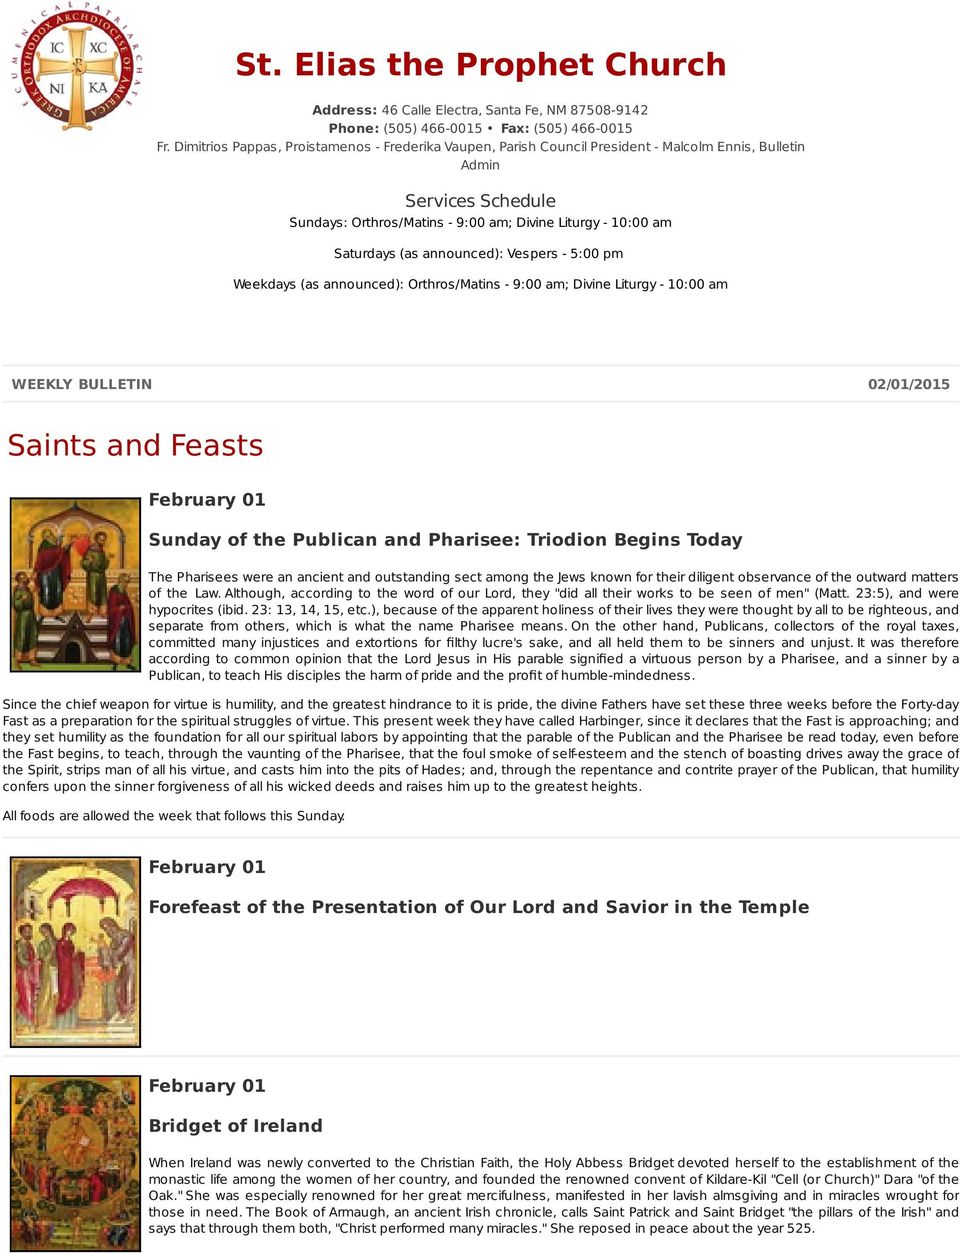 (as announced): Vespers - 5:00 pm Weekdays (as announced): Orthros/Matins - 9:00 am; Divine Liturgy - 10:00 am WEEKLY BULLETIN 02/01/2015 Saints and Feasts Sunday of the Publican and Pharisee: